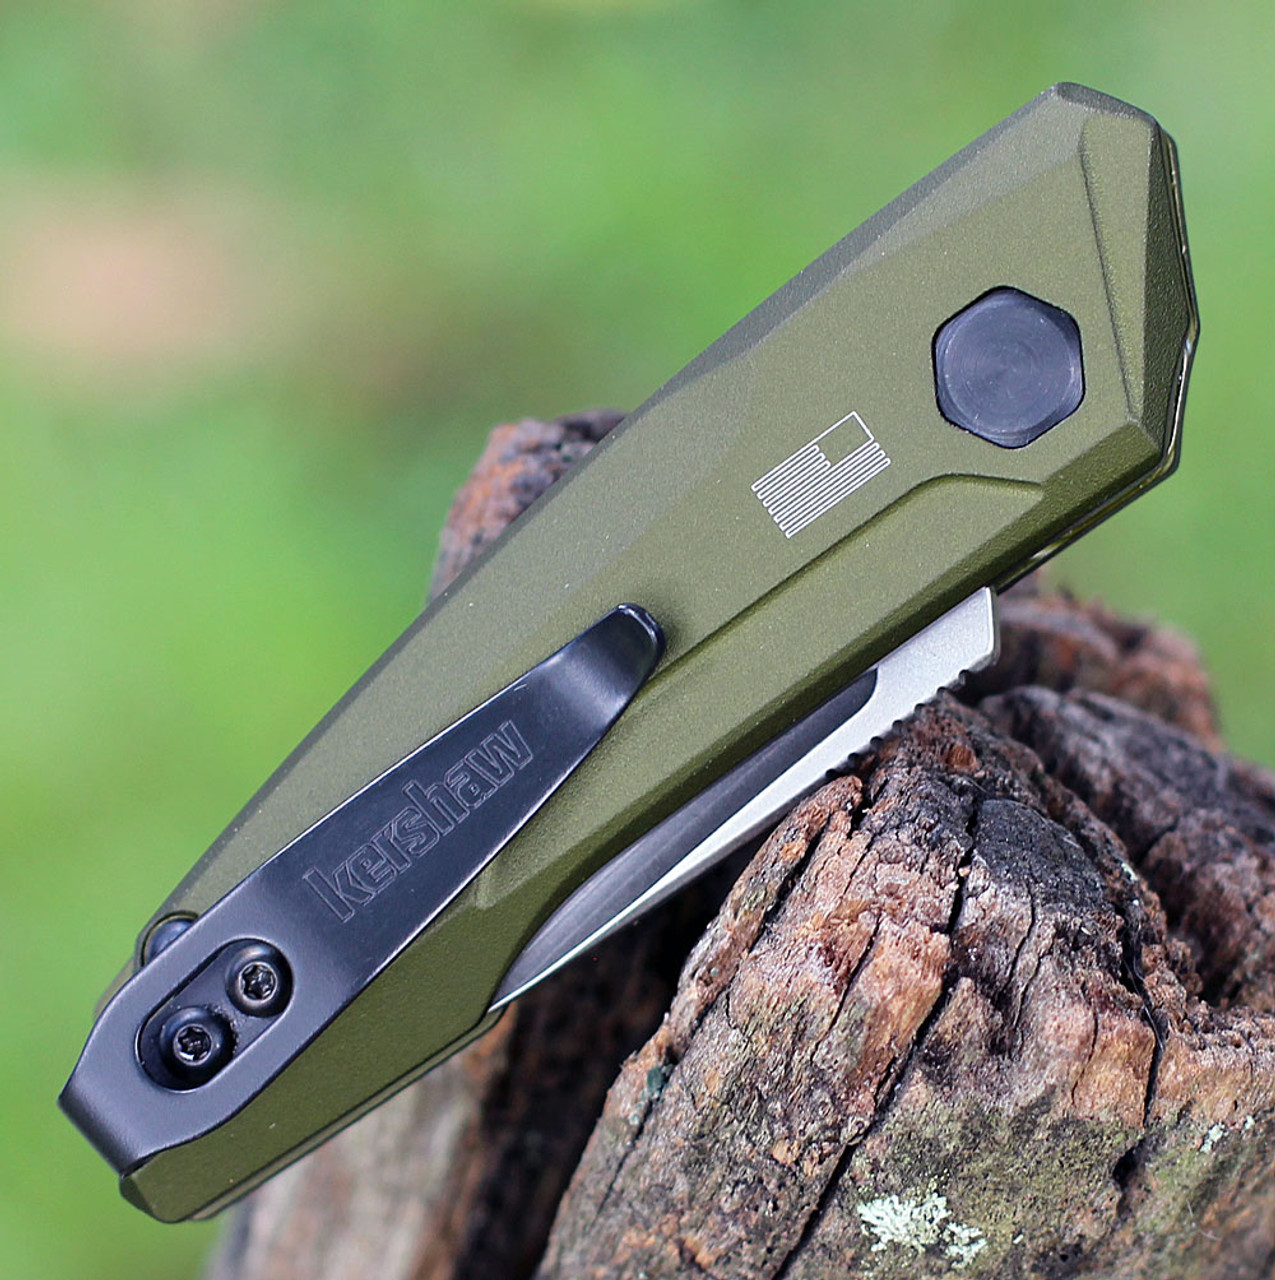 Kershaw Launch 9 Automatic Knife (7250OLSW)- 1.80" Stonewashed CPM-154 Drop Point Blade, OD Green Aluminum Handle